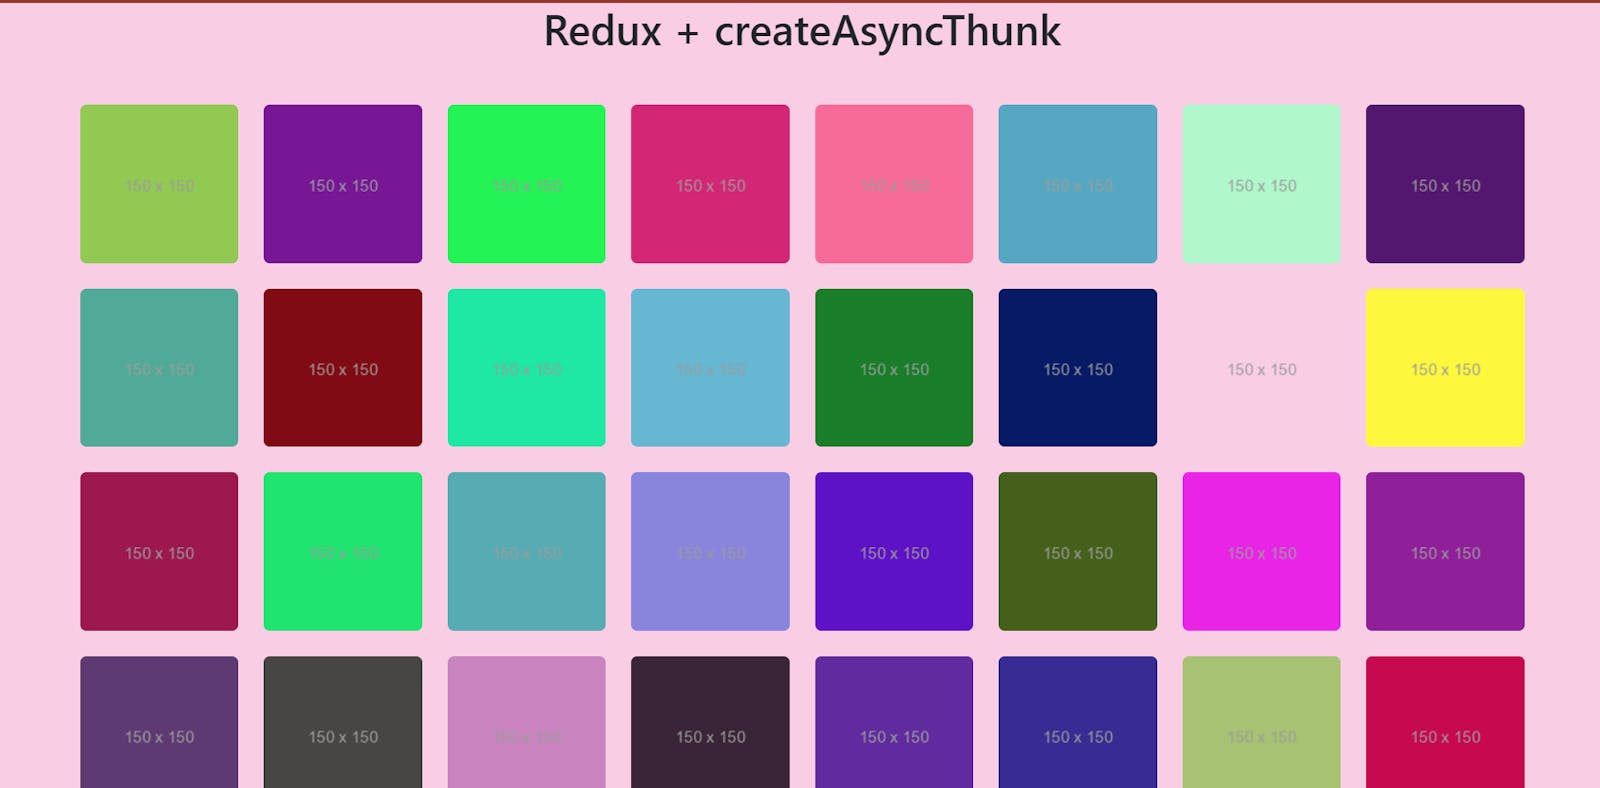 Simplify Async Actions in Redux with createAsyncThunk